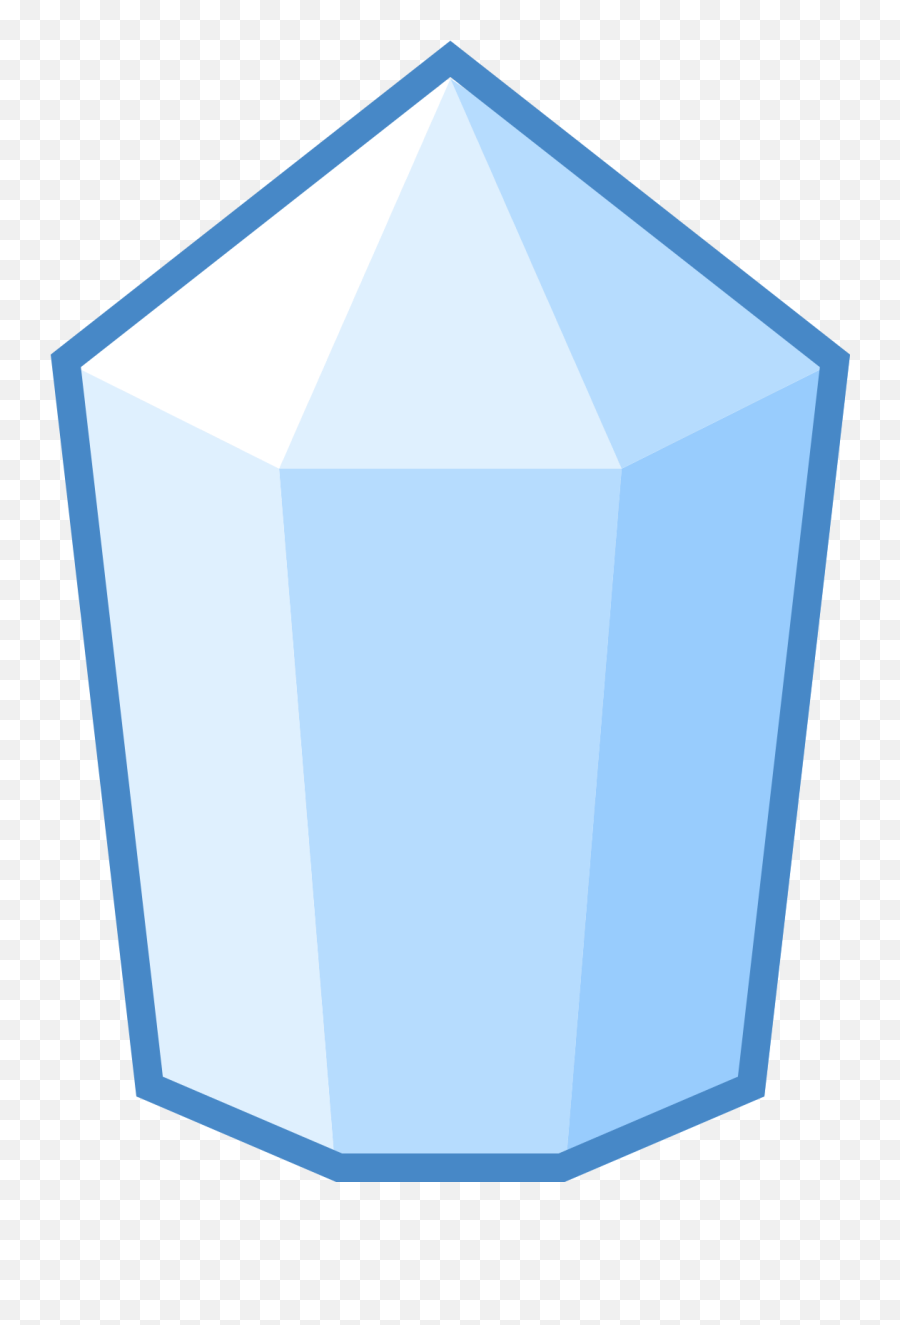 Crystal Icon Png - Triangle Full Size Png Download Seekpng,Crystal Icon